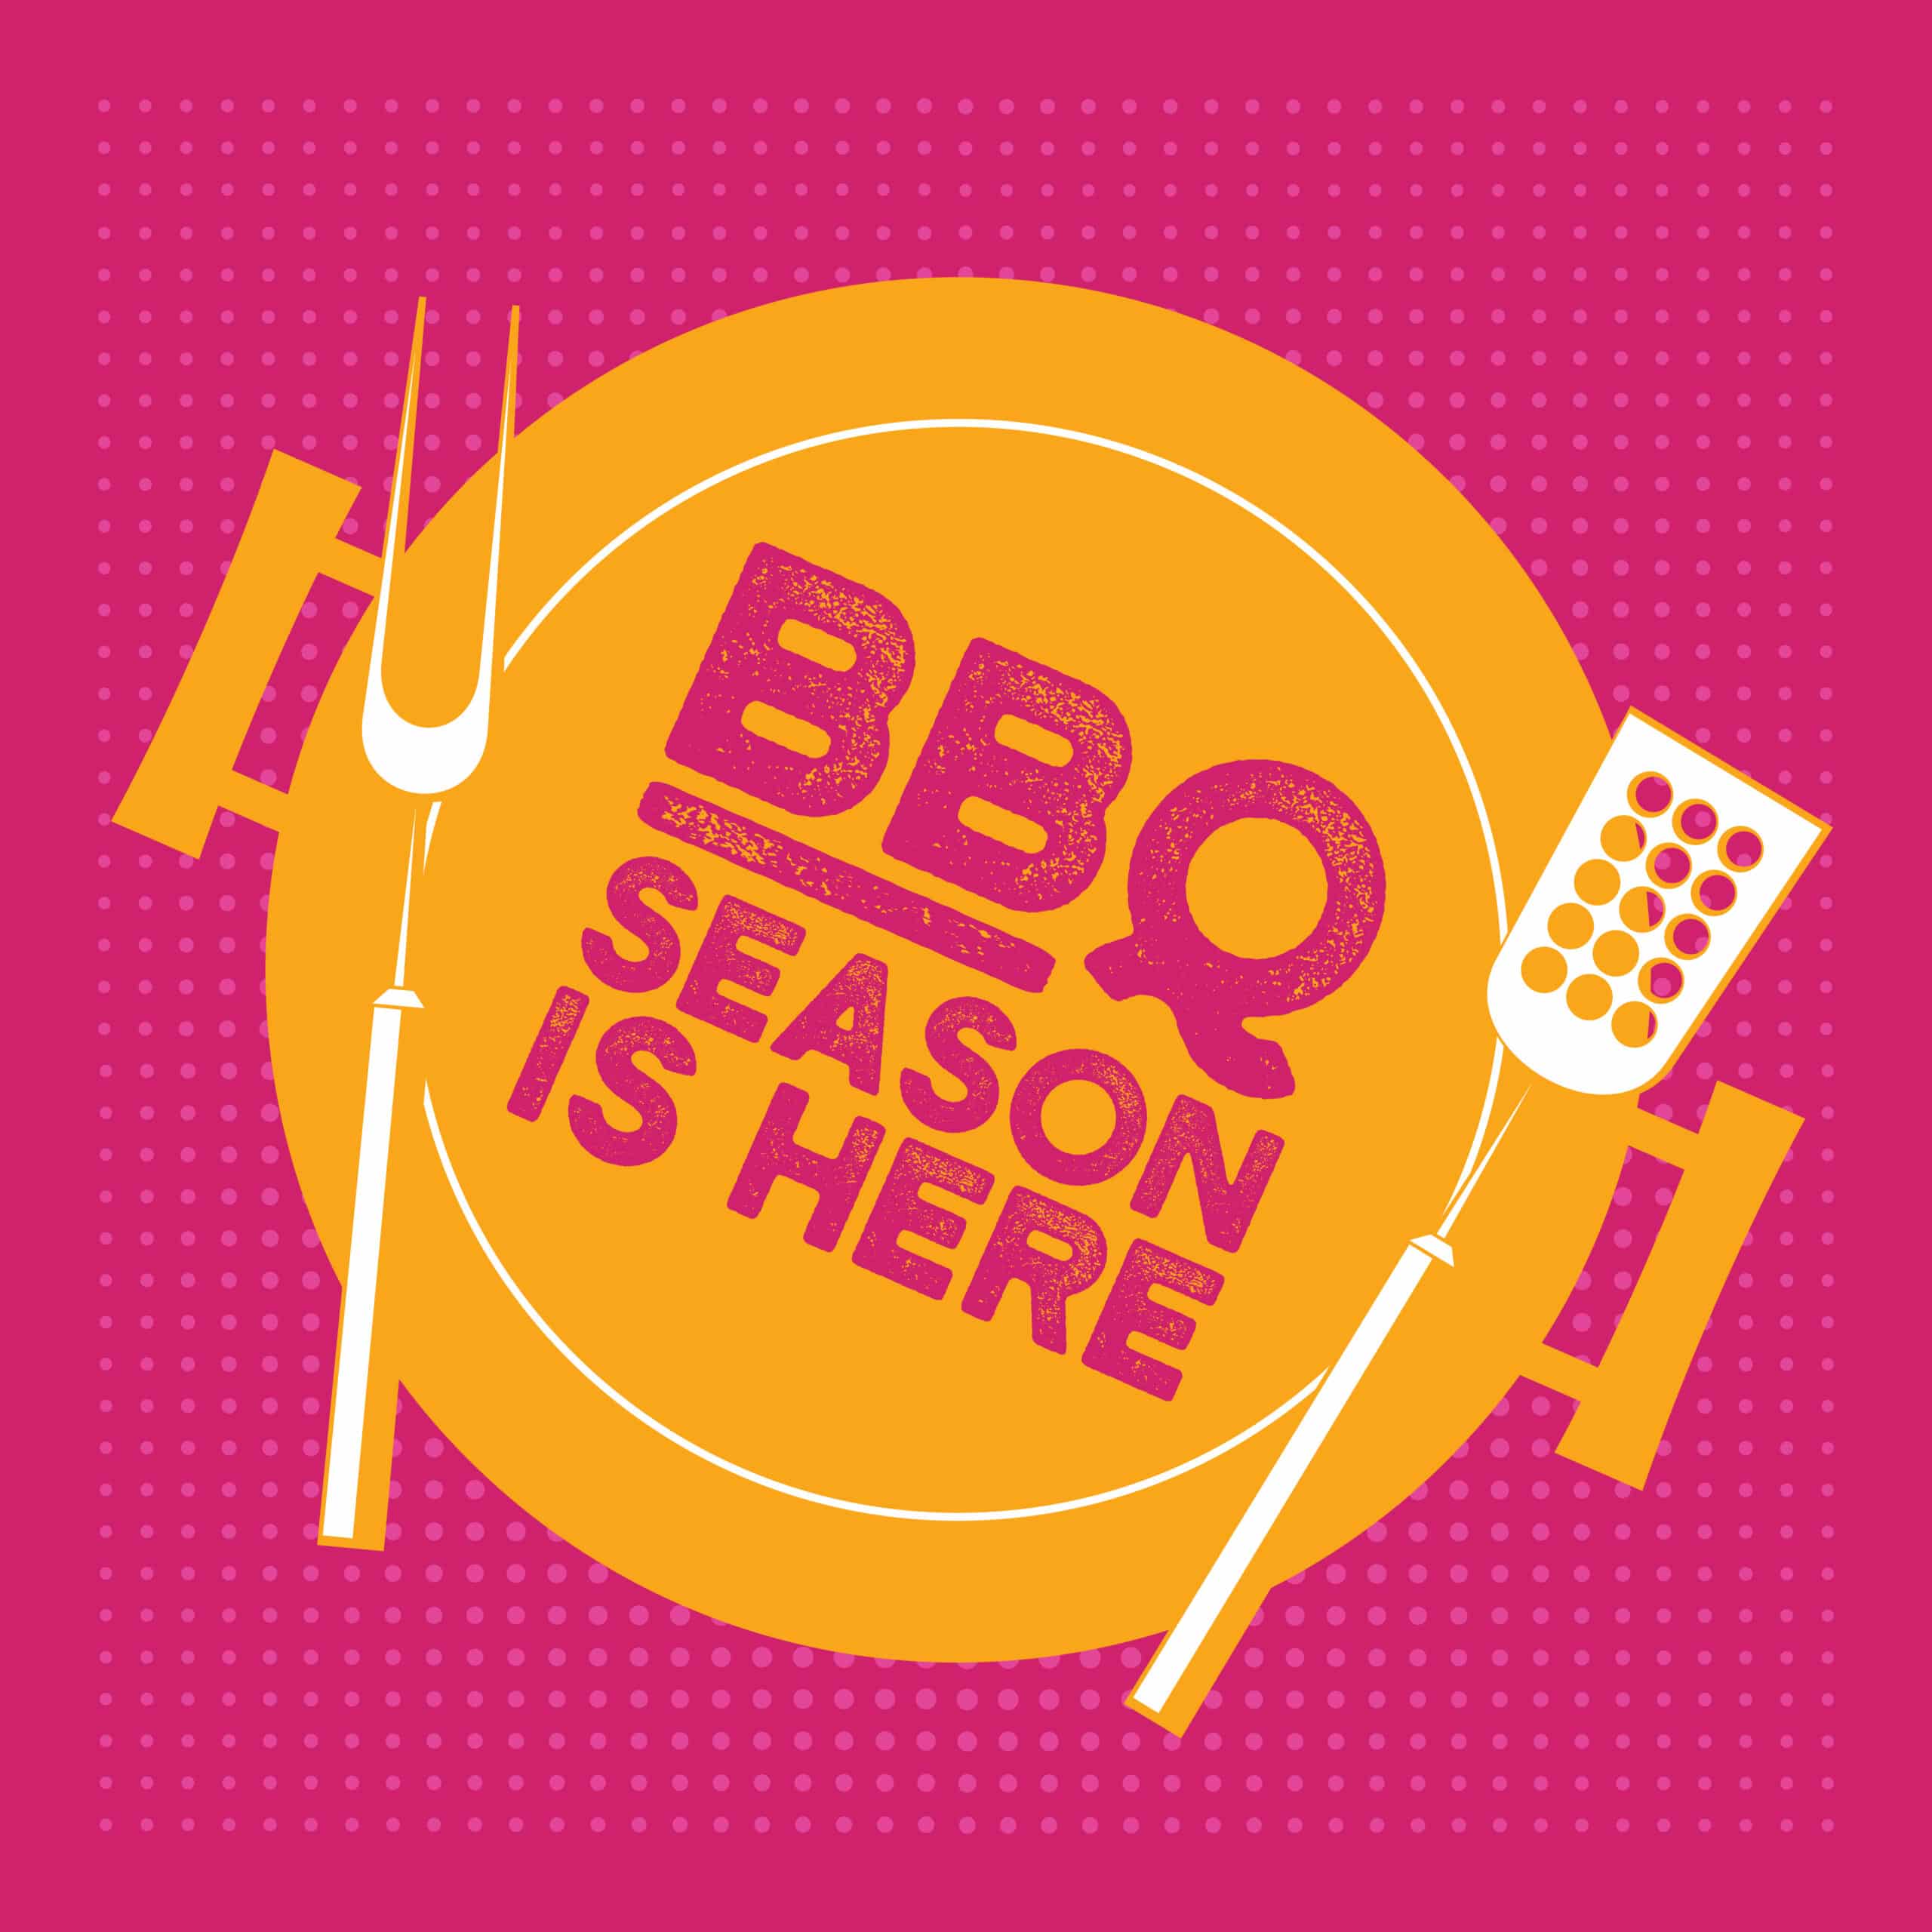 BBQ season is here graphic in pink and yellow